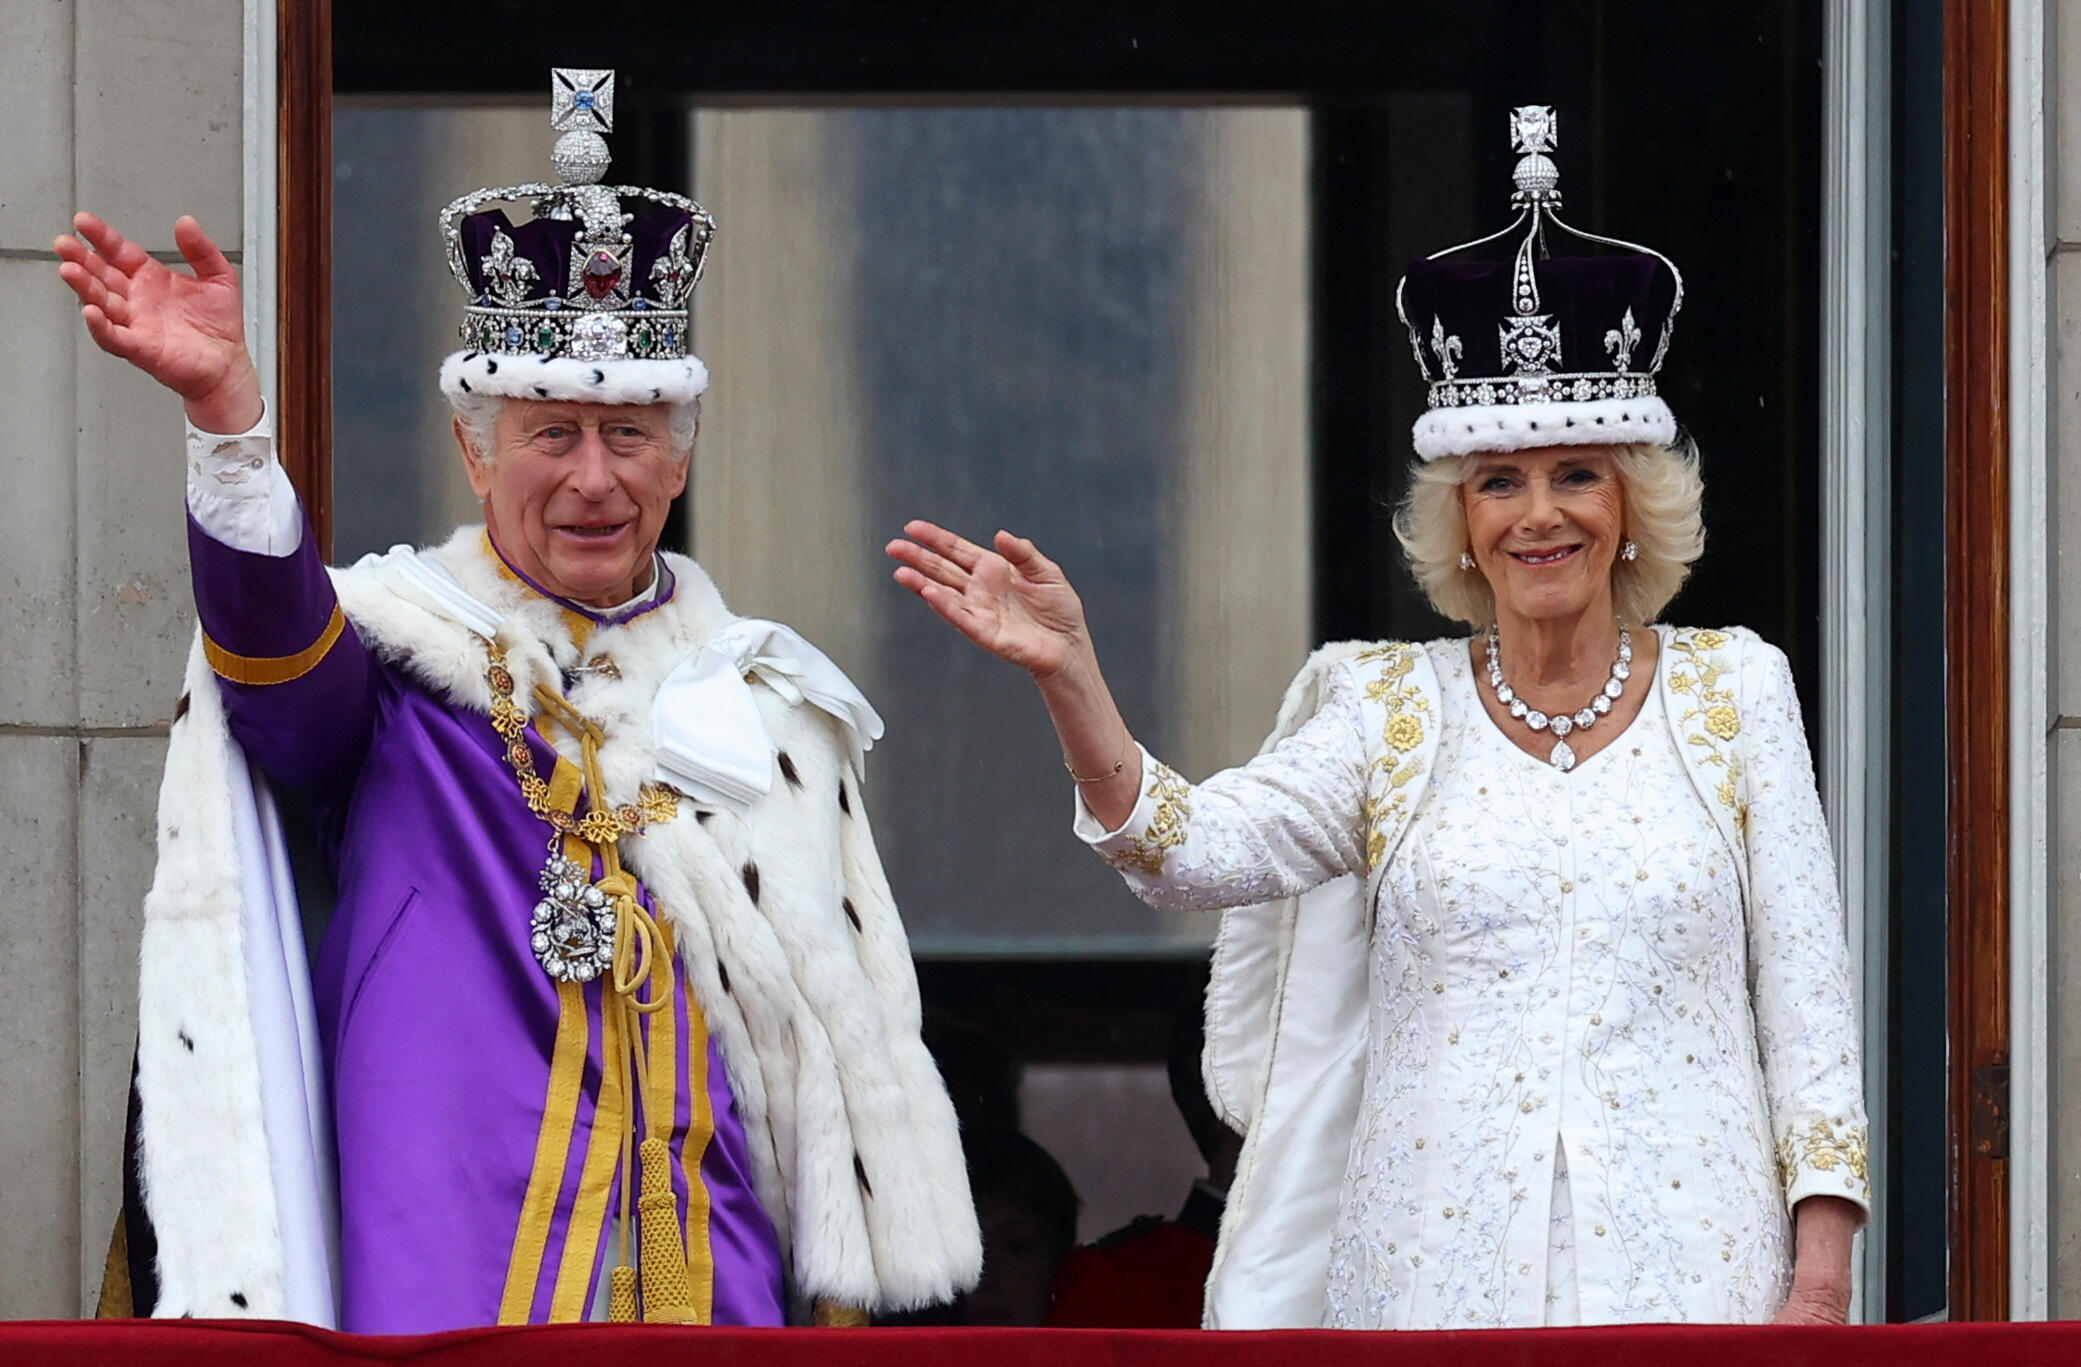 Newly crowned King Charles III and Queen Camilla wave from the balcony of Buckingham Palace after their coronation ceremony in London on May 6, 2023.